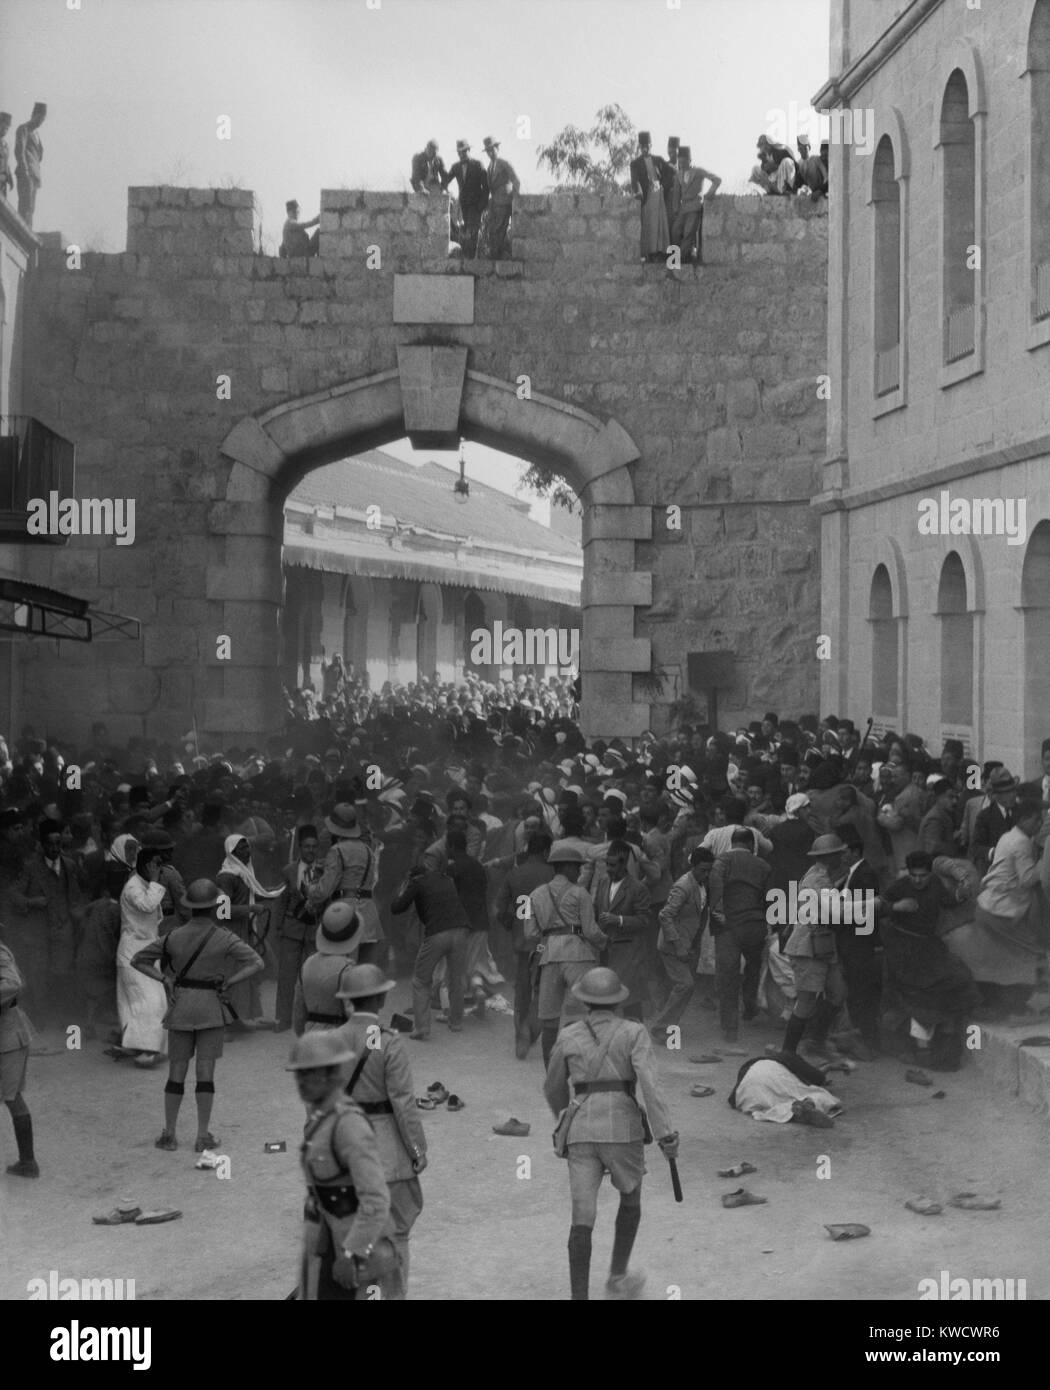 Arab demonstration at the New Gate, Jerusalem, as the police cordon blocked the procession. Oct. 13, 1933. Initiated by the Arab Executive Committee, the police dispersed the protest with their riot sticks (BSLOC 2017 1 197) Stock Photo